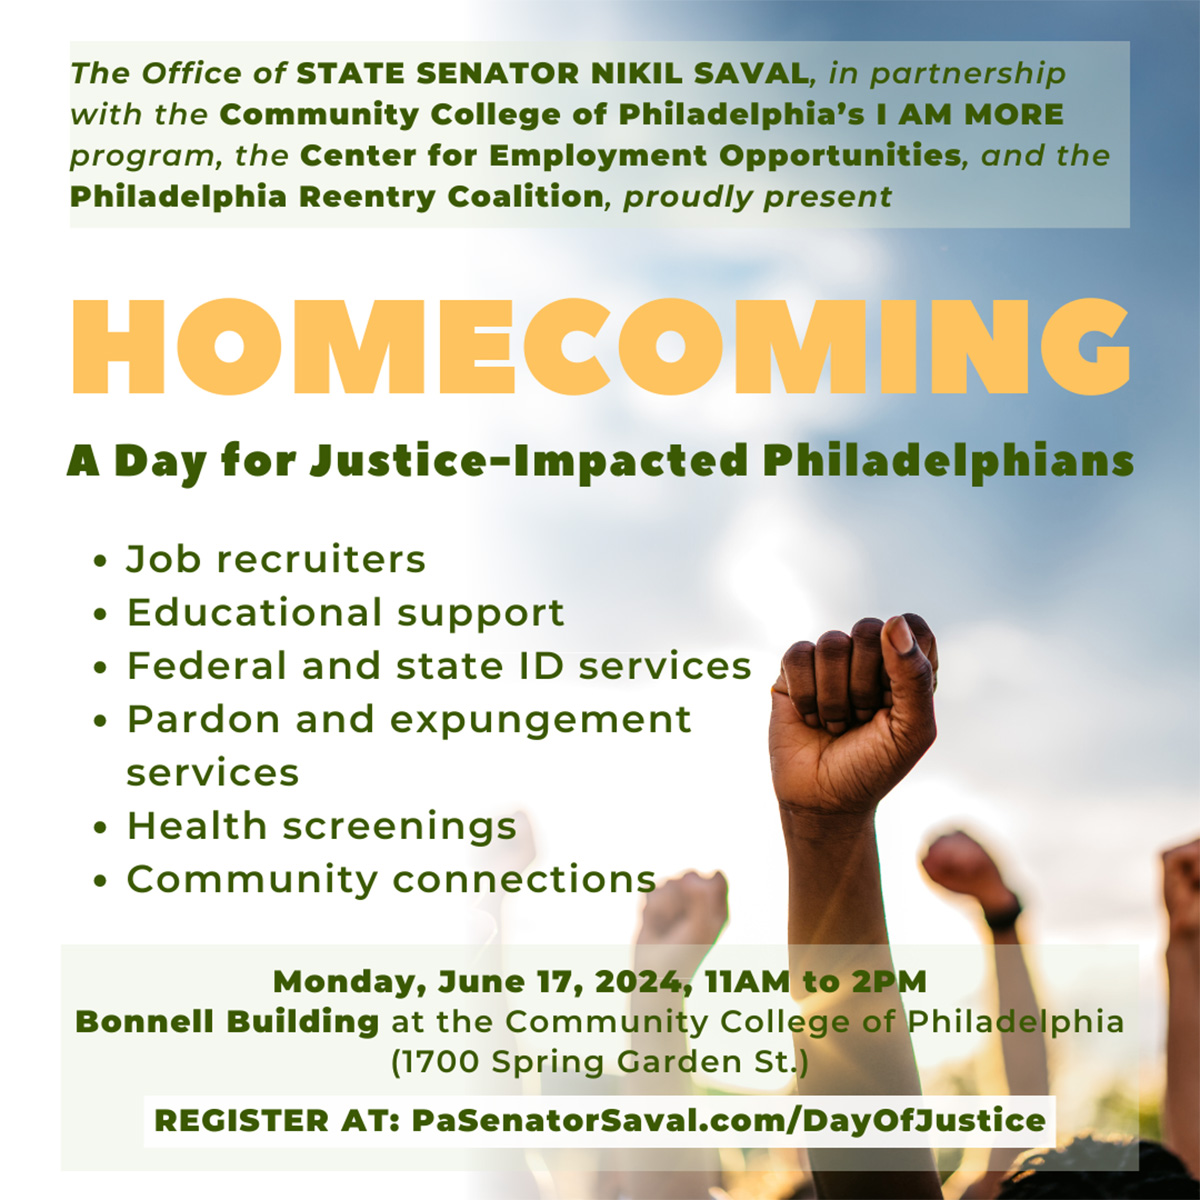 Homecoming: A Day for Justice Impacted Philadelphians - June 17, 2024